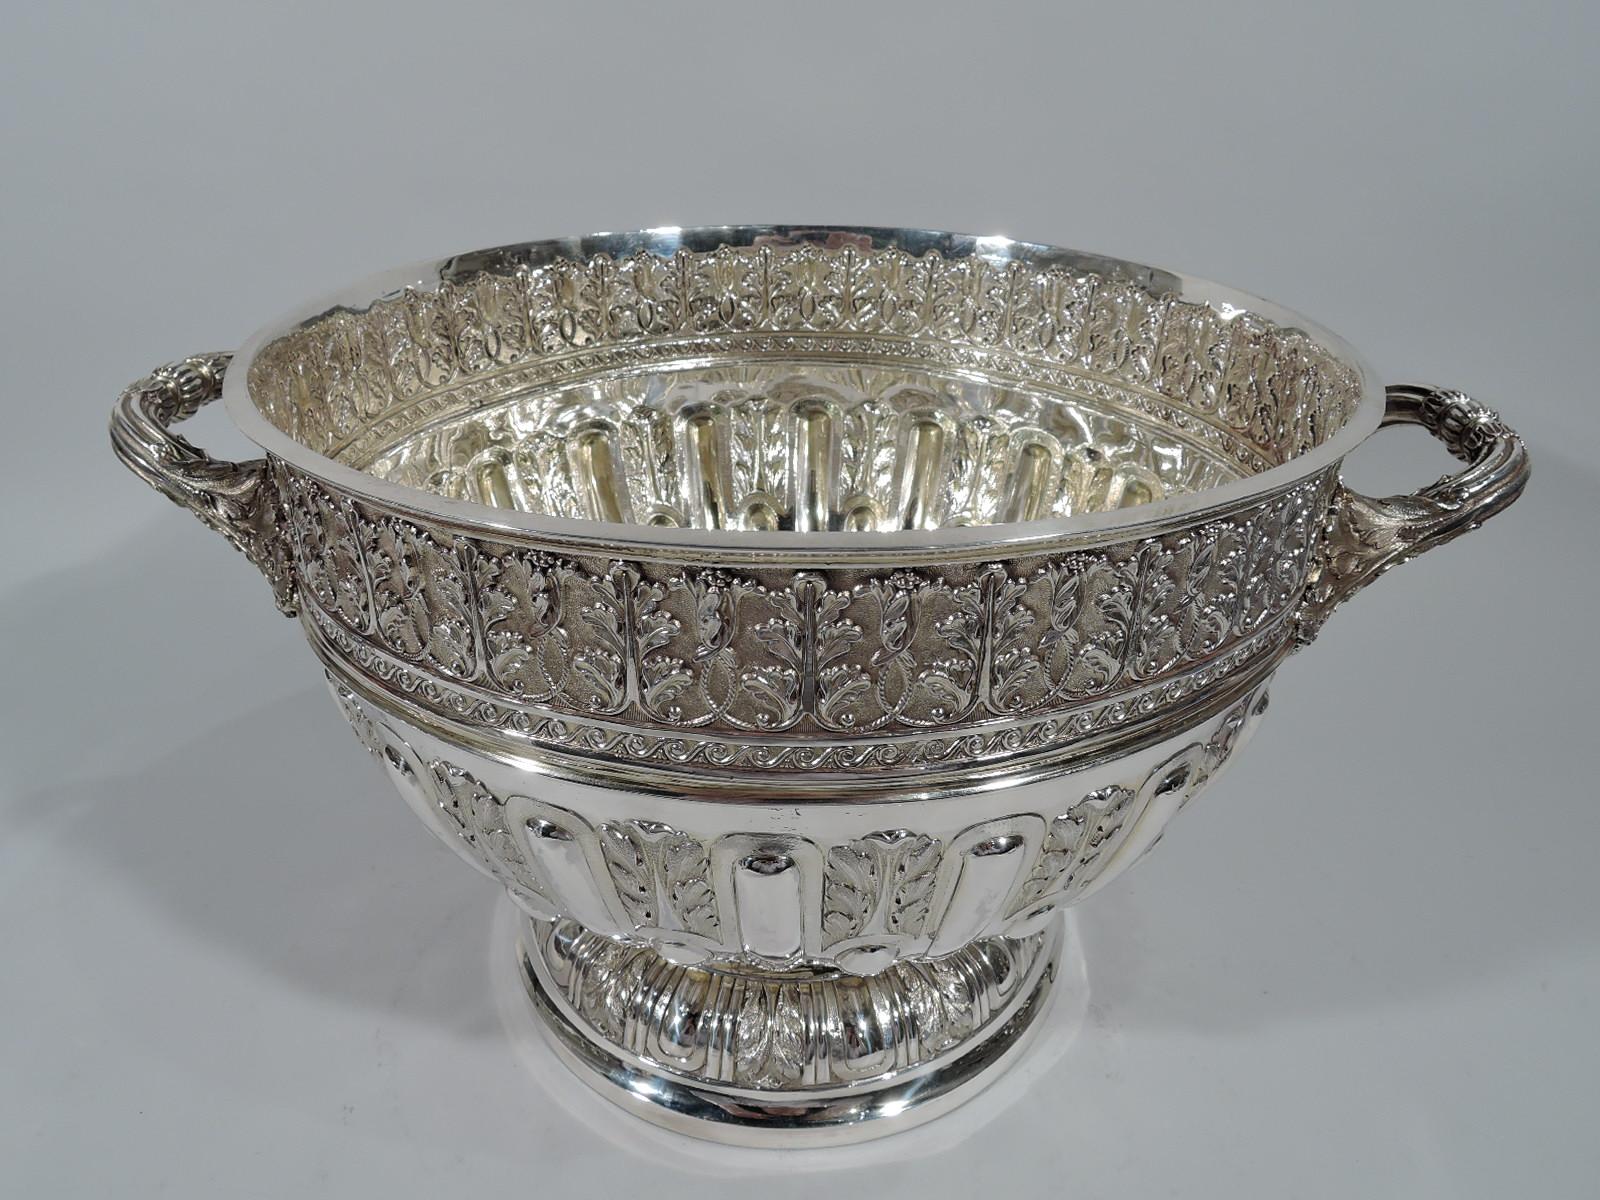 Victorian sterling silver centerpiece bowl. Made by John Newton Mappin in London in 1890. Curved sides, domed foot, and leaf-mounted bracket handles. Big and bold Classical ornament. Sides have alternating gadroons and foliate flutes bisected with